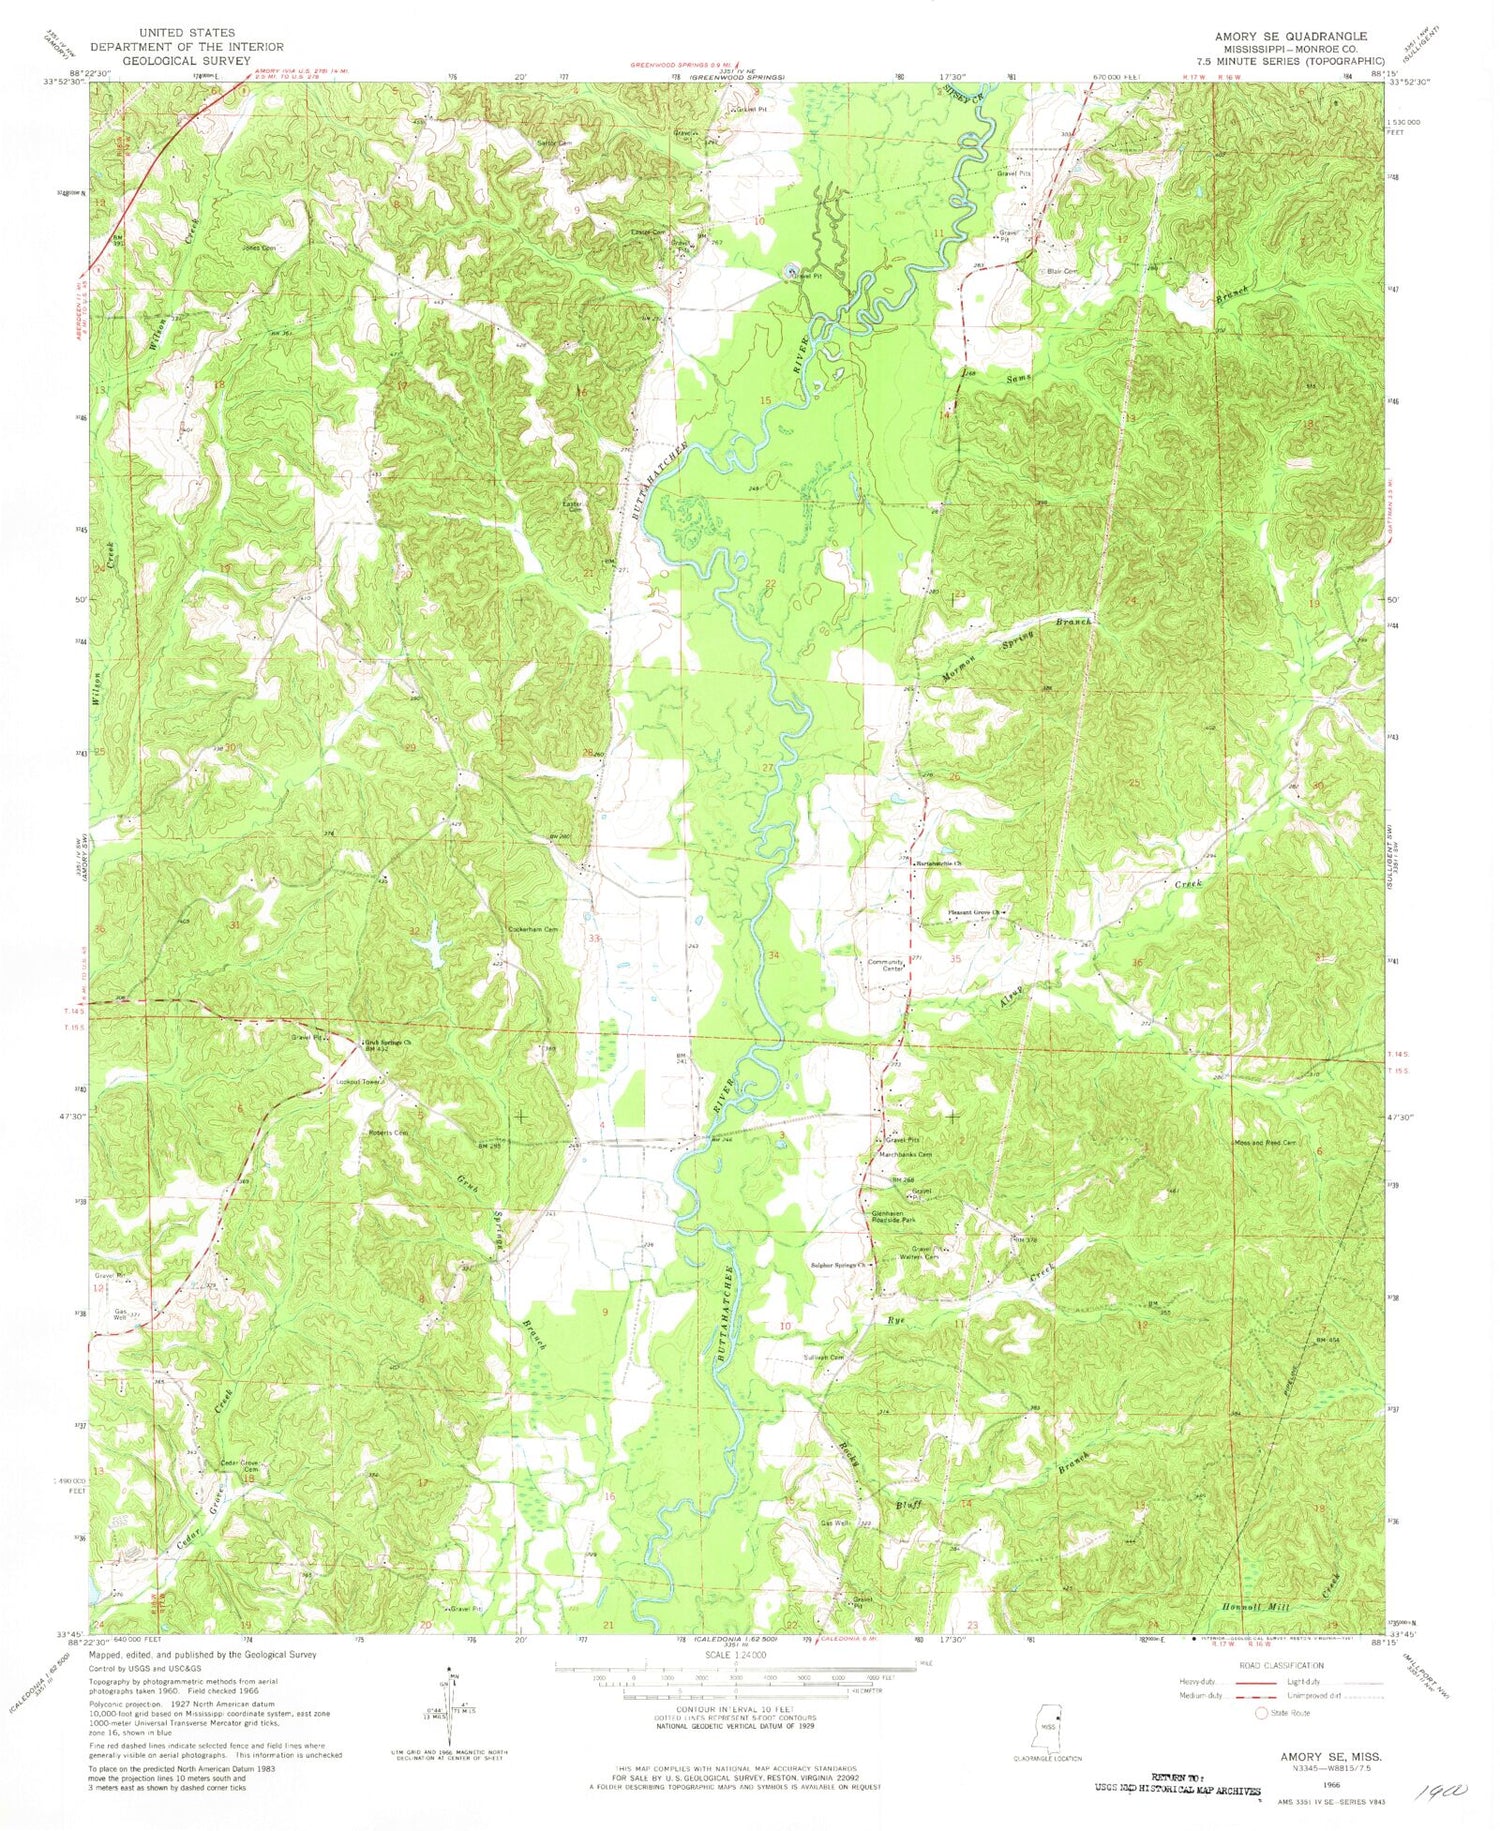 Classic USGS Amory SE Mississippi 7.5'x7.5' Topo Map Image